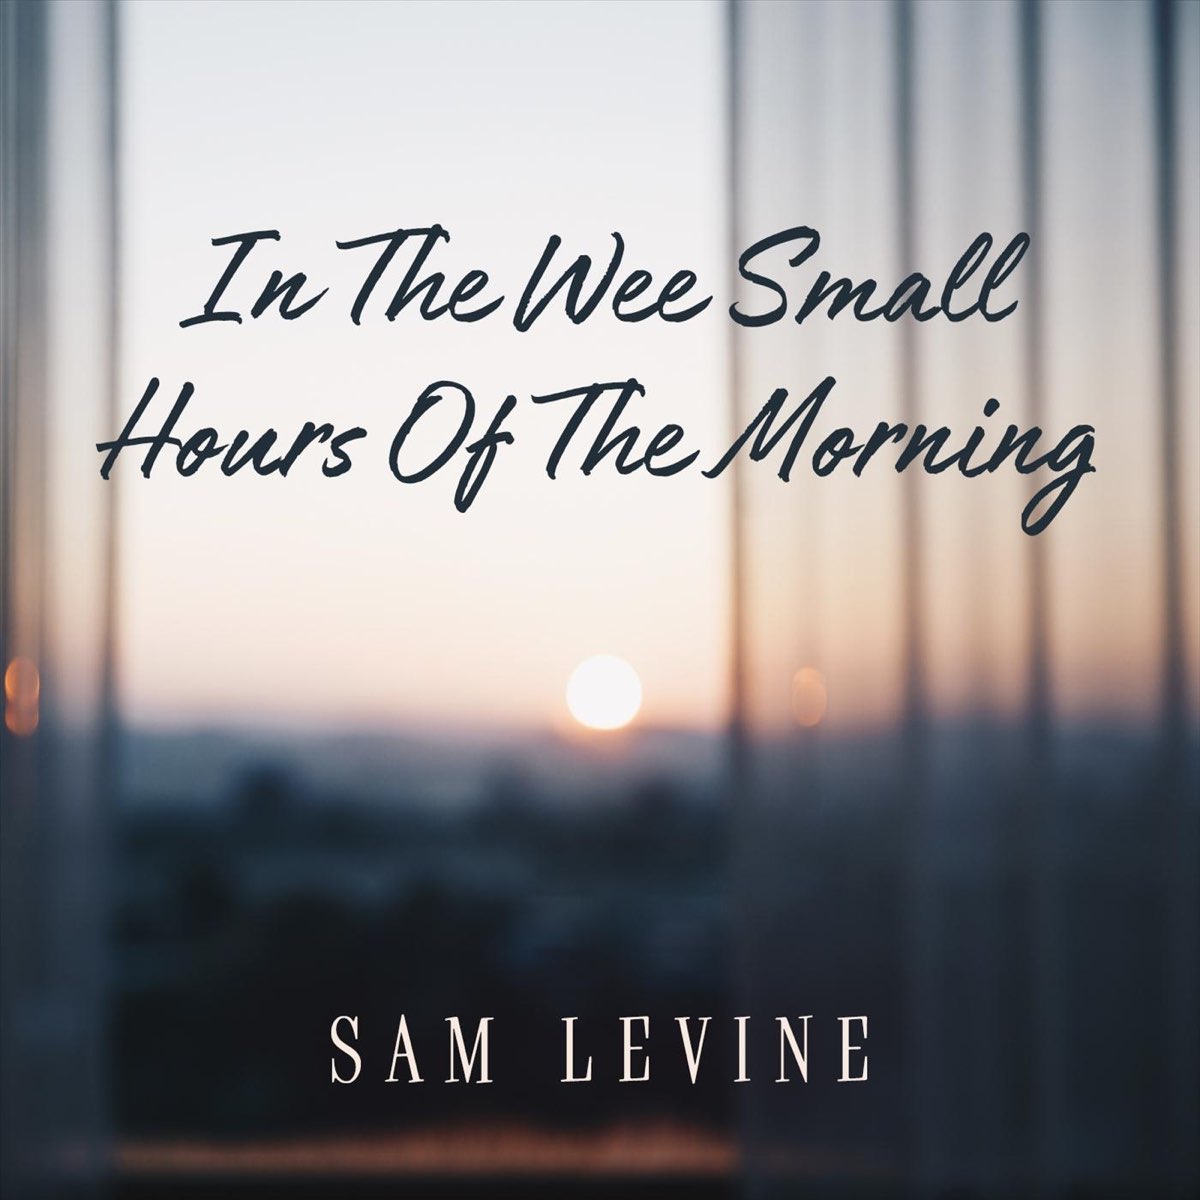 Small hours. In the Wee small hours альбом. In the Wee small hours. Christmas hour - Sam Levine - amazing Grace.